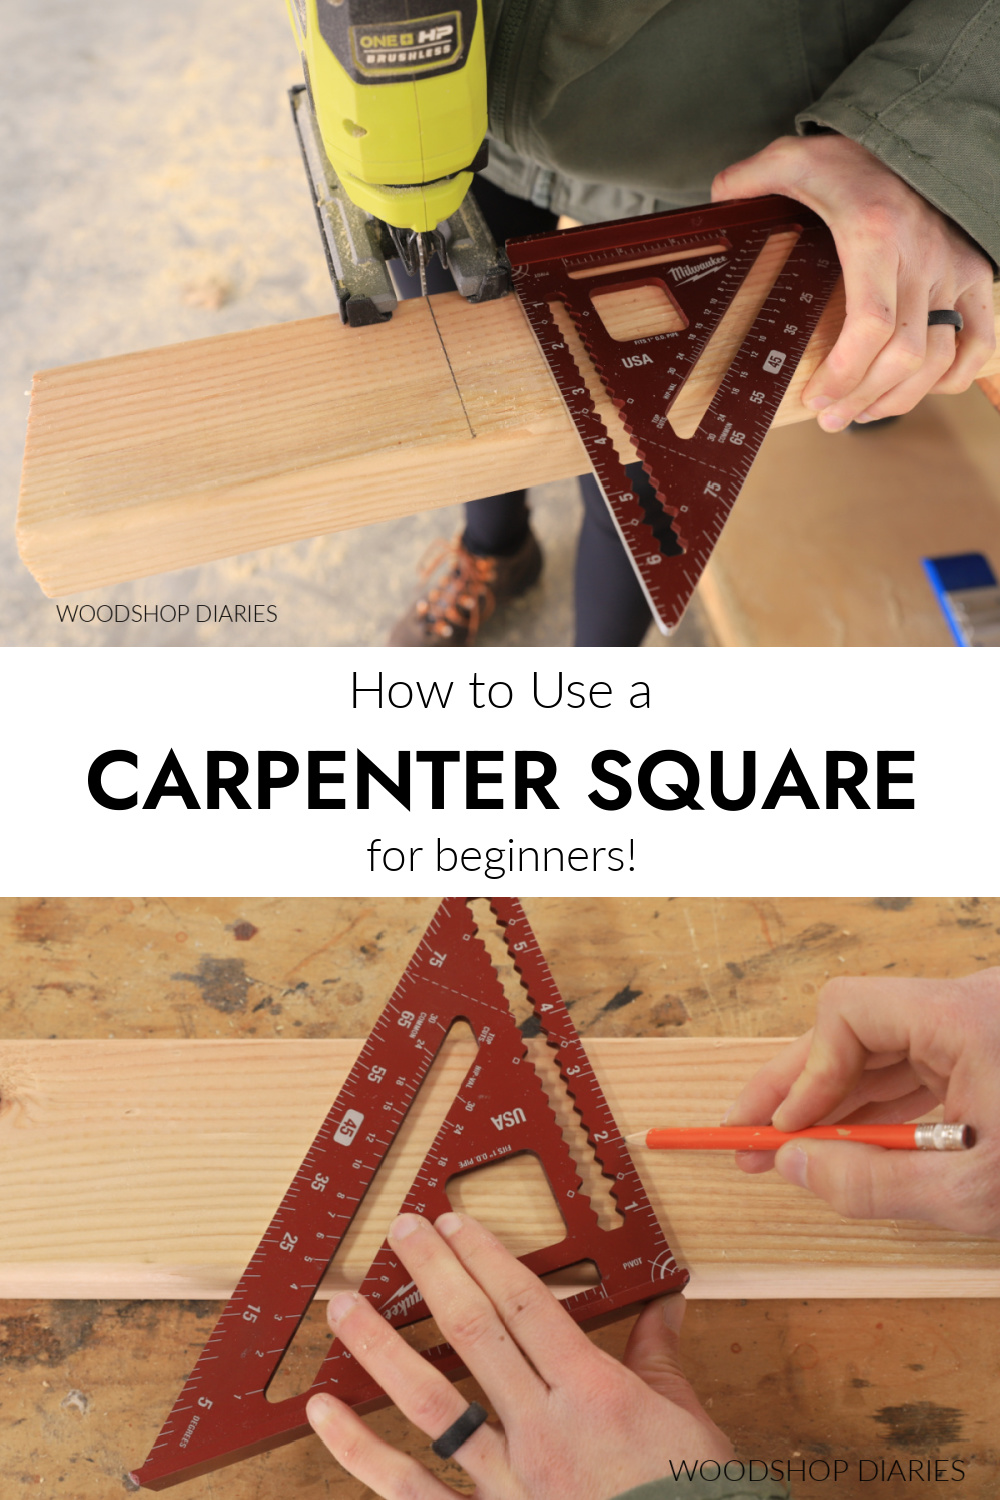 Pinterest collage image showing using square as cutting guide at top and drawing an angle at bottom with text "how to use a carpenter square for beginners"